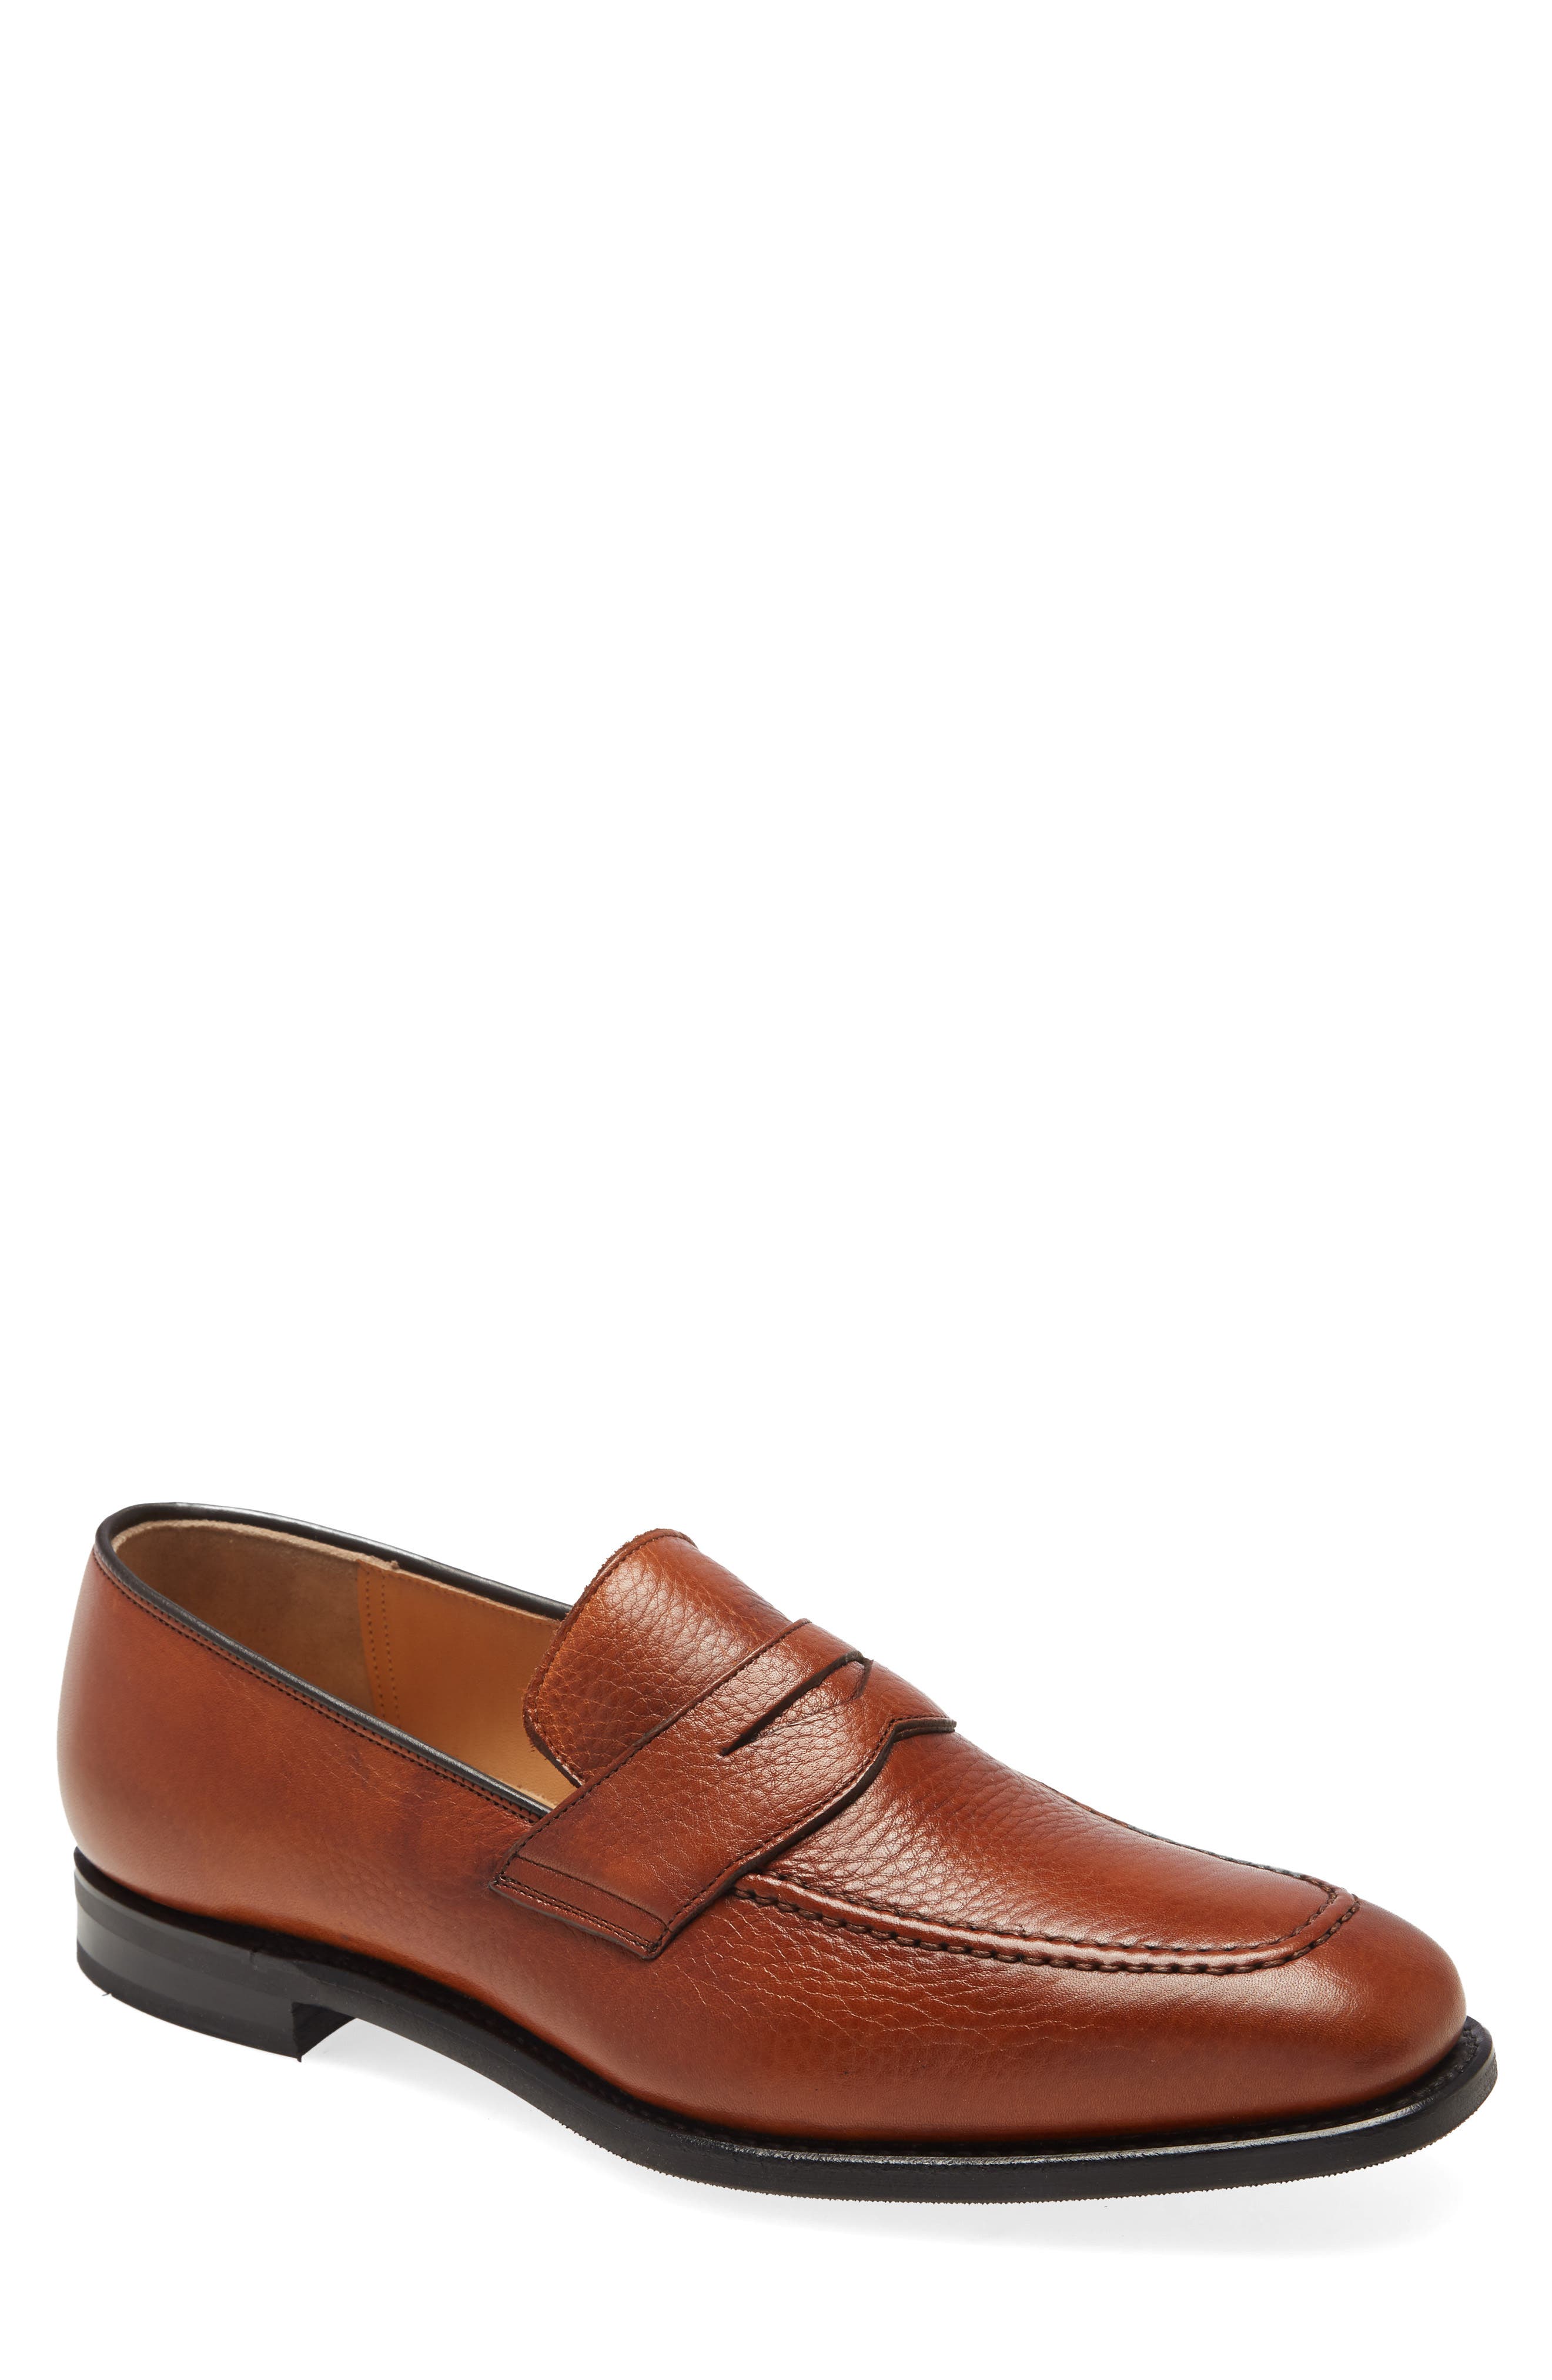 men's church's shoes loafers